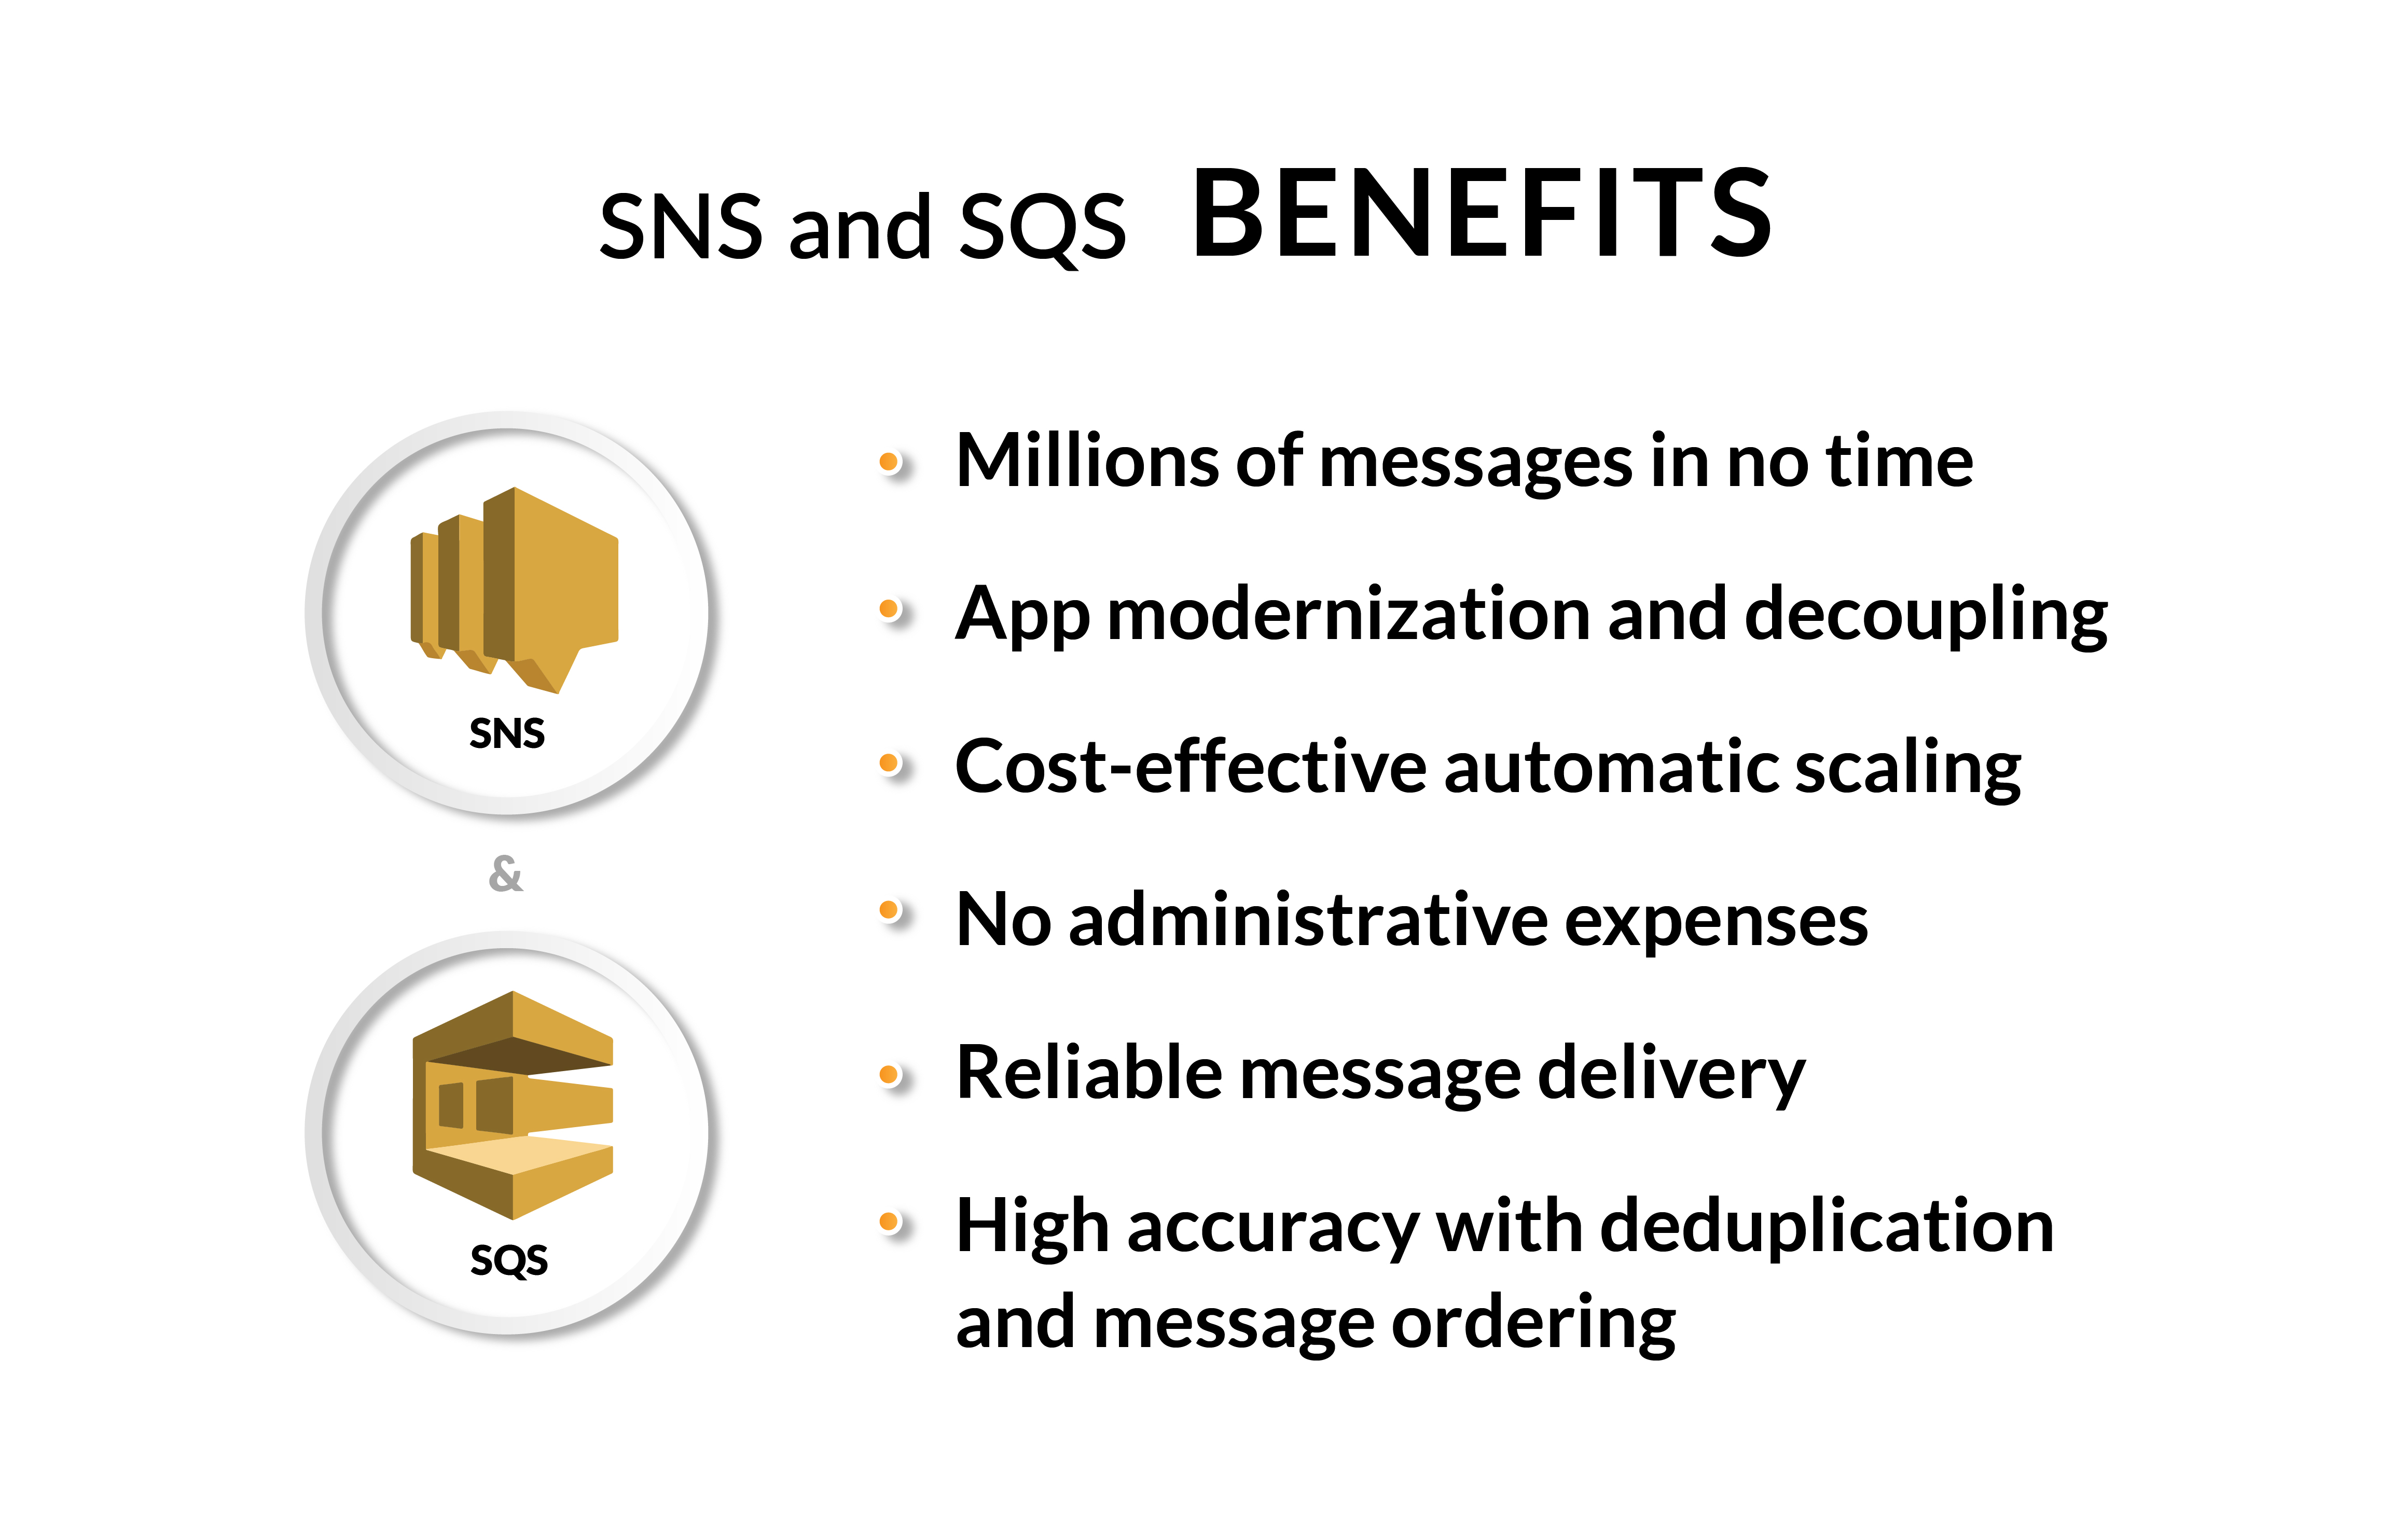 SNS and SQS benefits